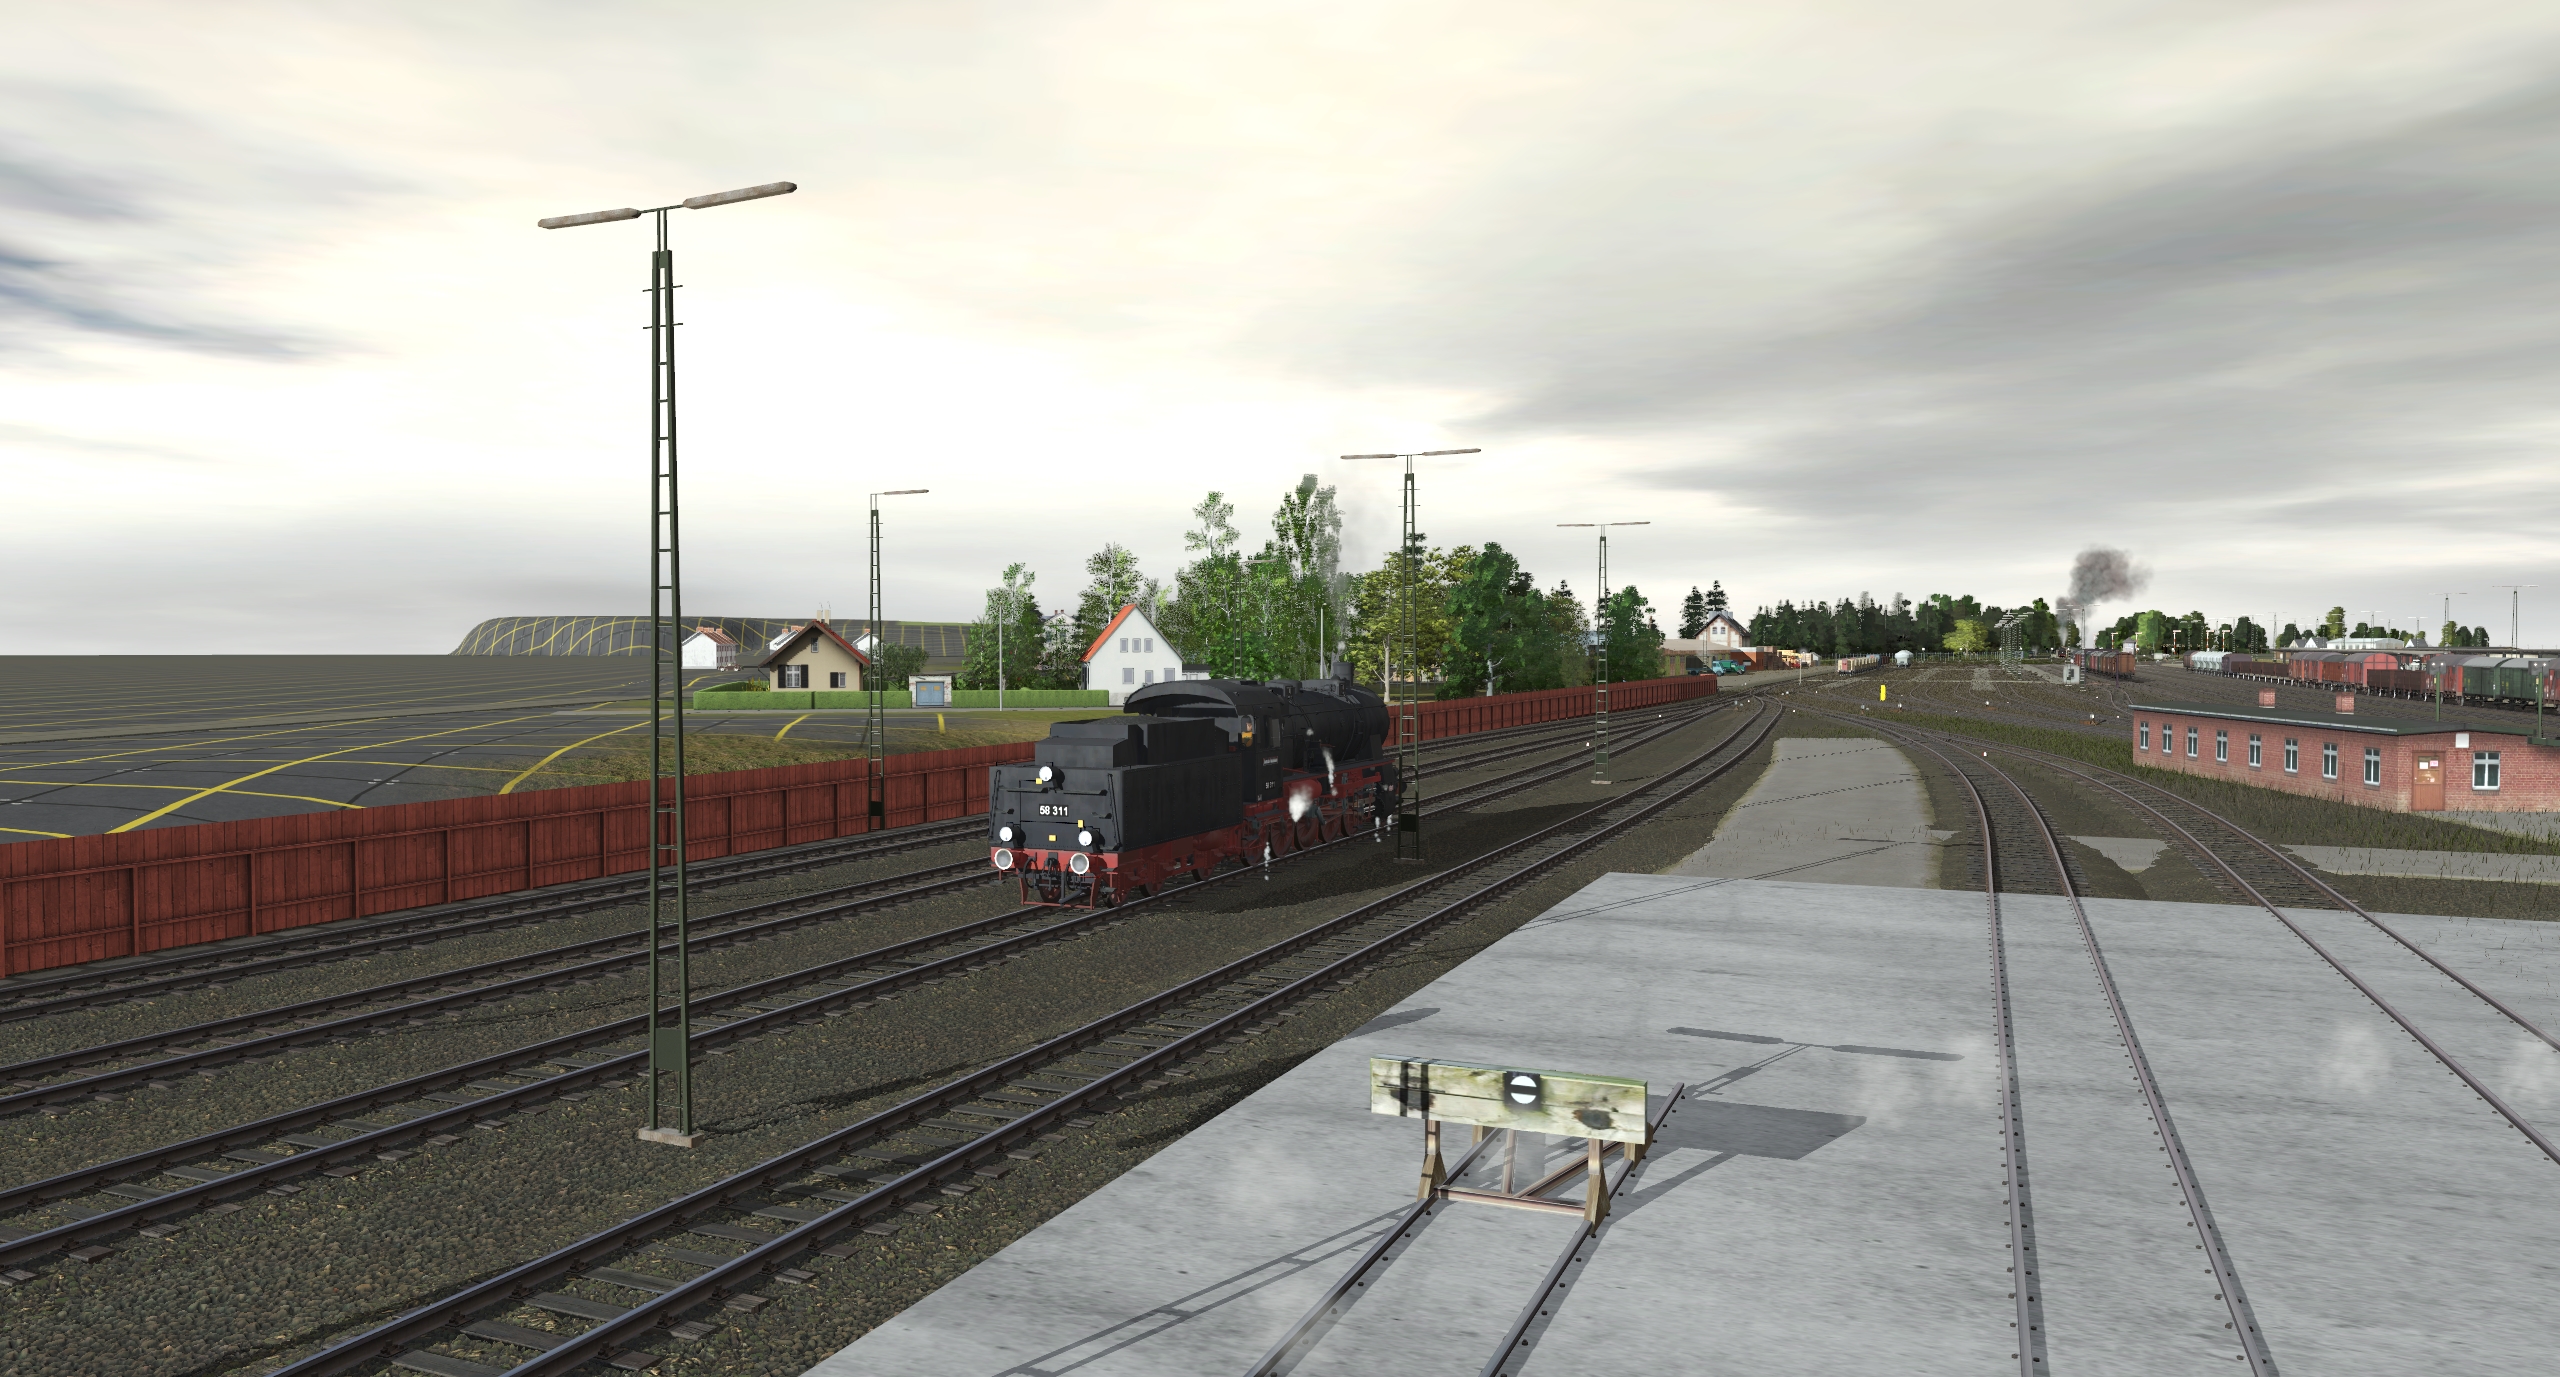 A view from the depot. A Br 56 is sitting seemingly alone